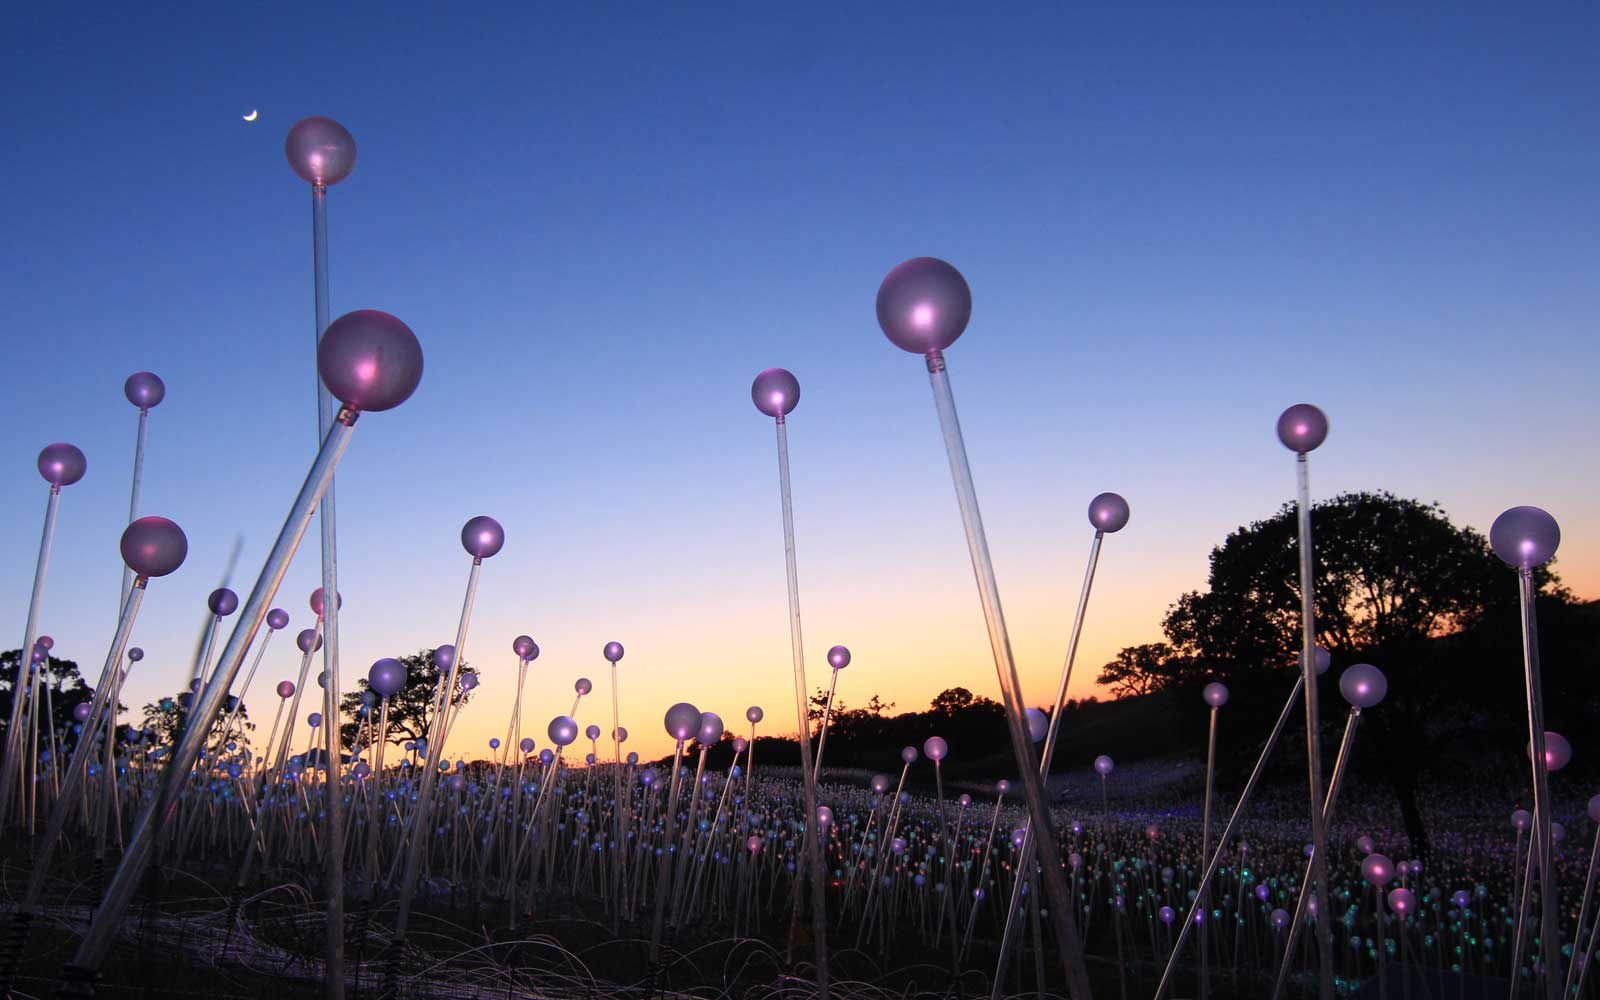 Nearly 60,000 twinkling LEDs light up the hills of Californian wine country